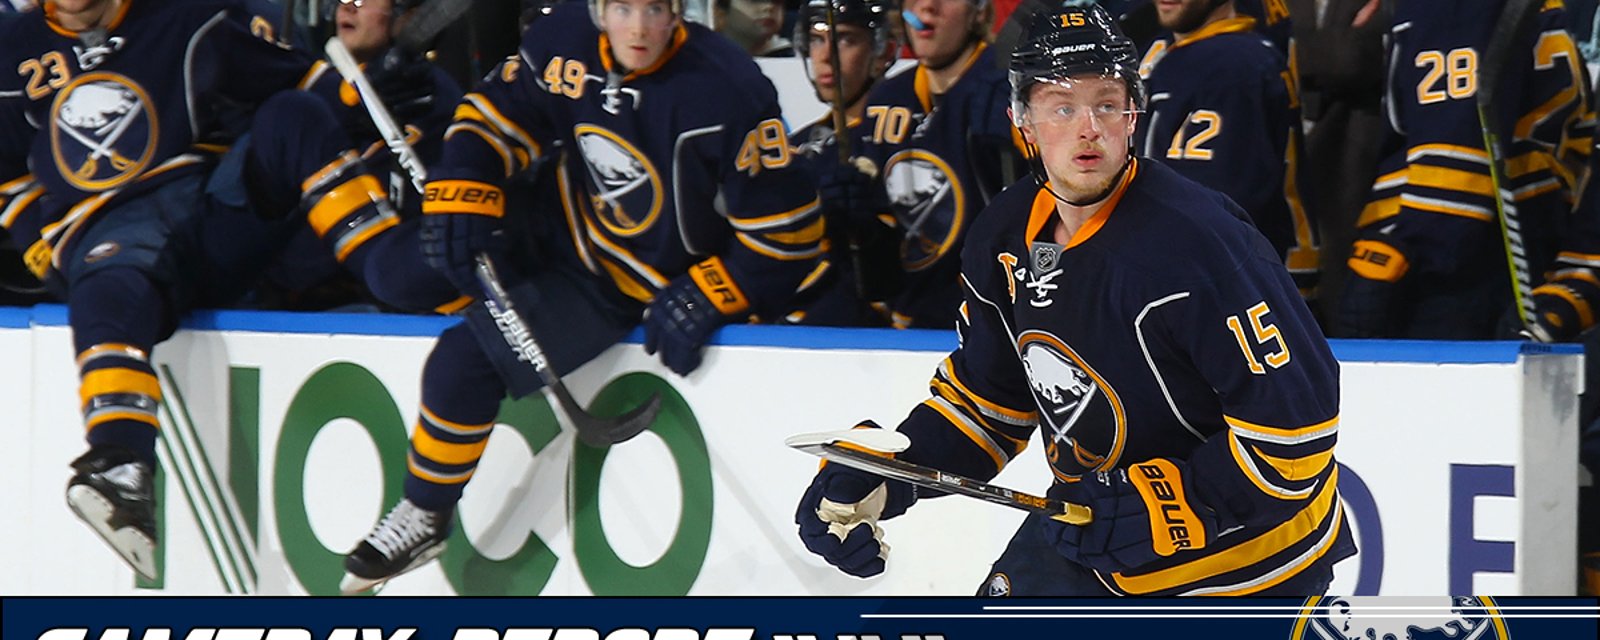 Report: Sabres head coach makes a couple of lineup changes ahead of tonight's game